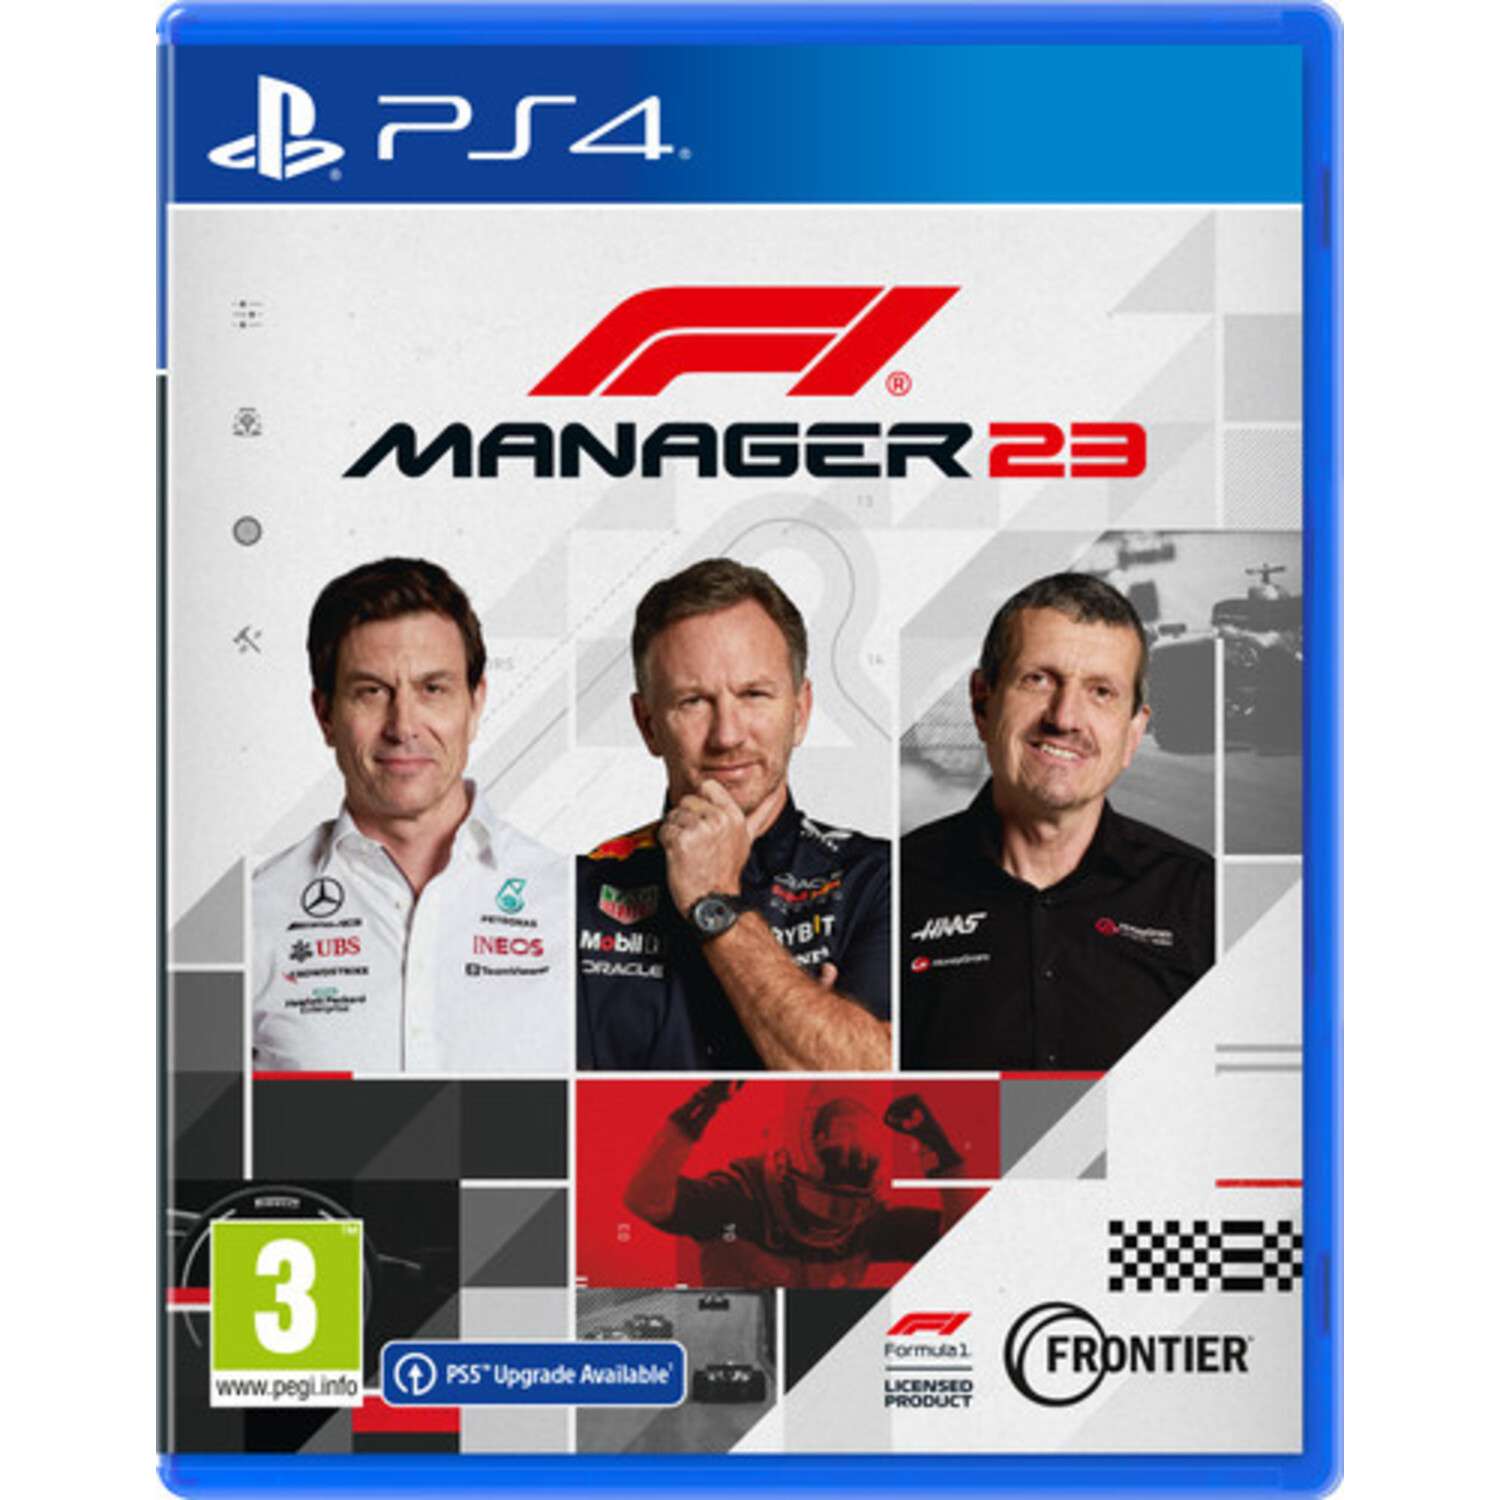 Specialist Game 23 Uw 4 - Manager F1 Playstation